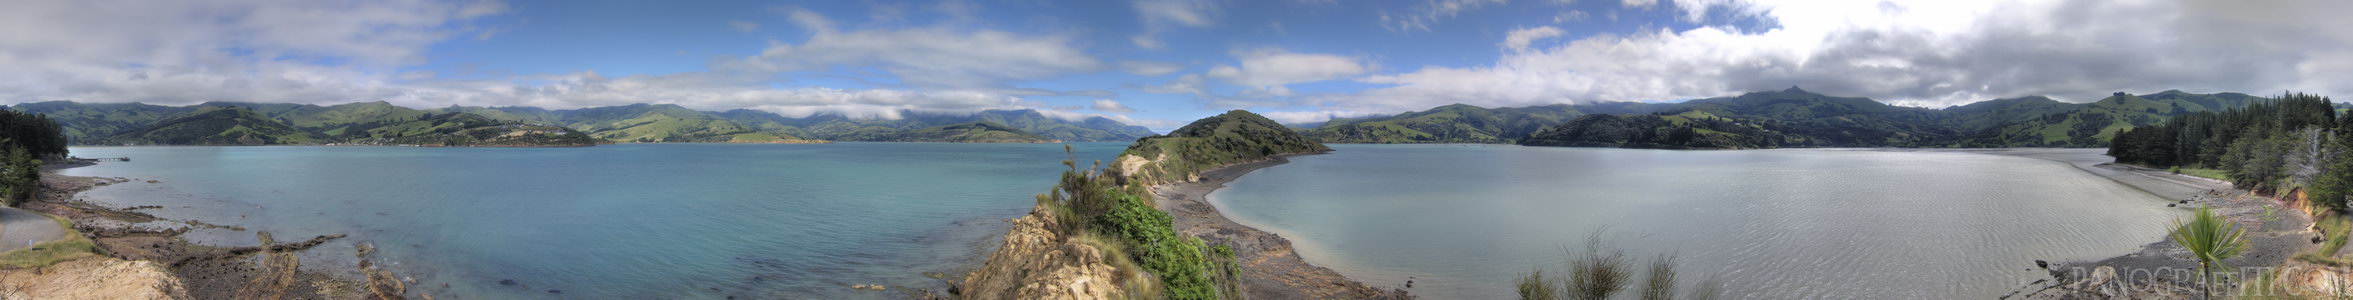 Onawe Peninsula in Akaroa Harbour - The Onawe Peninsula is a volcanic plug at the end of Akaroa Harbour.  This 360 degree view was shot with 3 bracketed exposures and rendered in HDR.